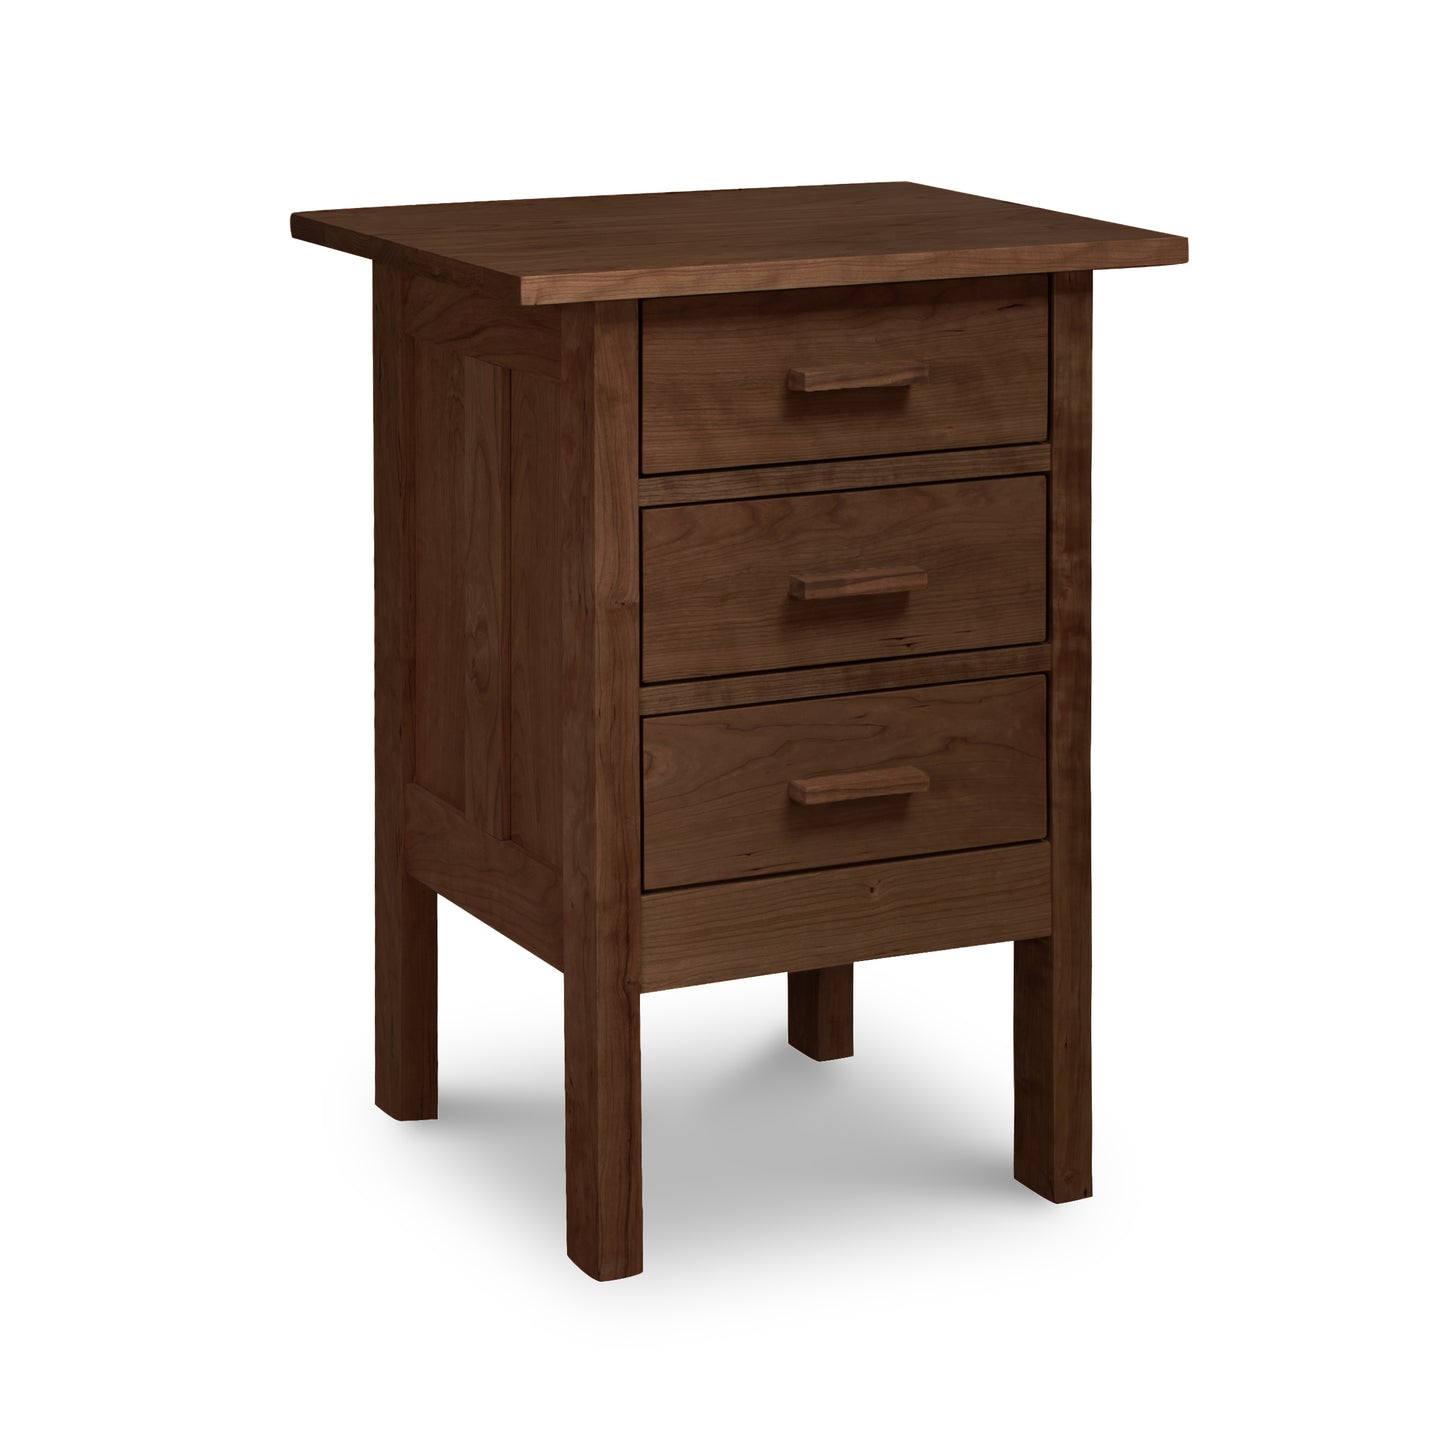 A Modern Craftsman 3-Drawer Nightstand by Vermont Furniture Designs isolated on a white background.